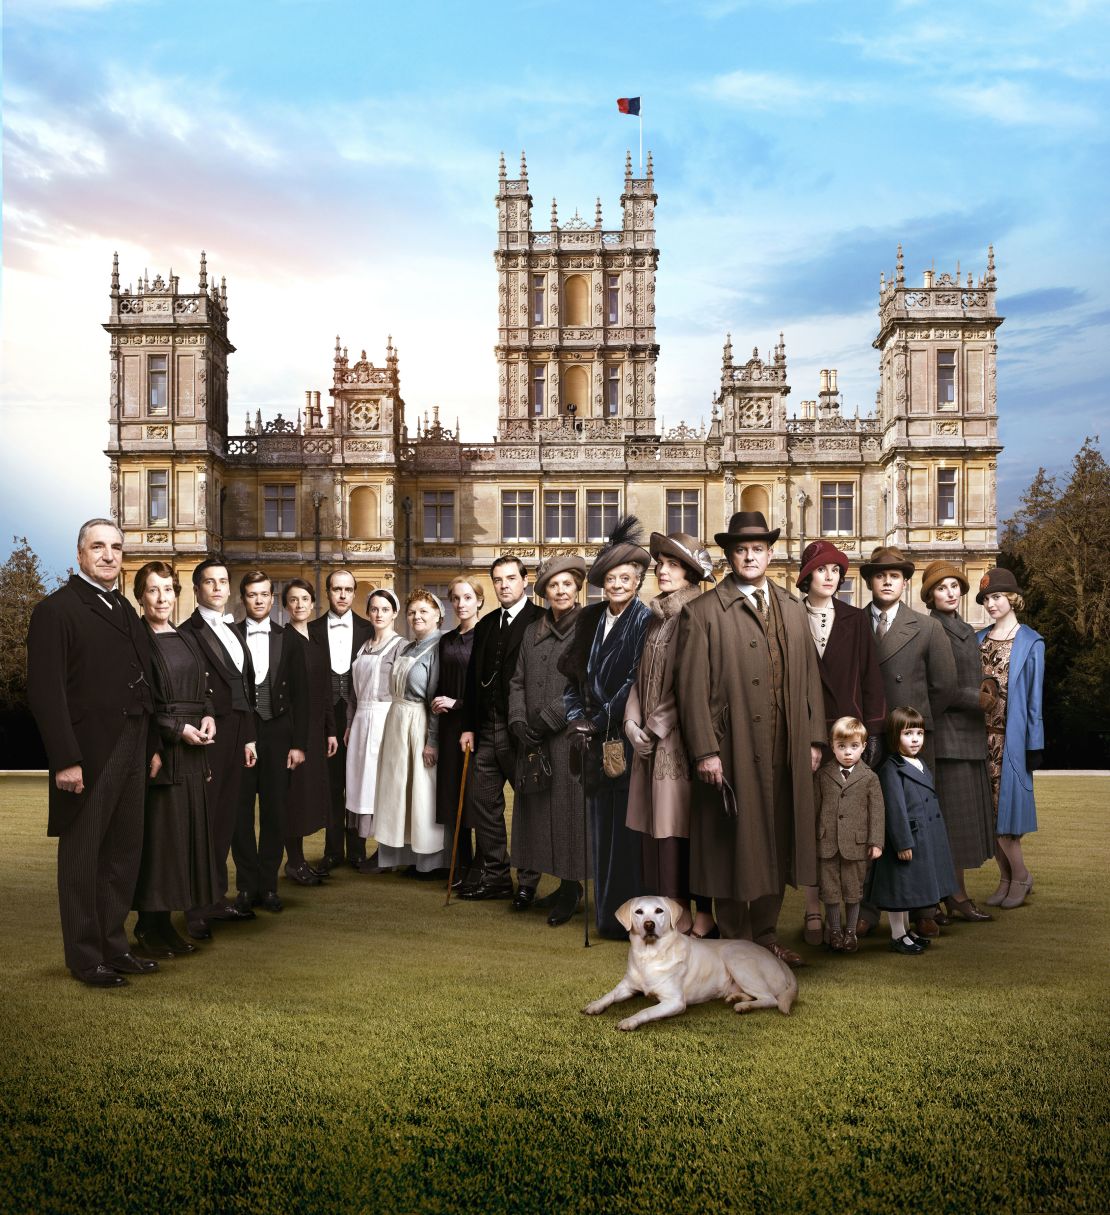 An image of the 'Downton Abbey' cast in Season 5 of the television series